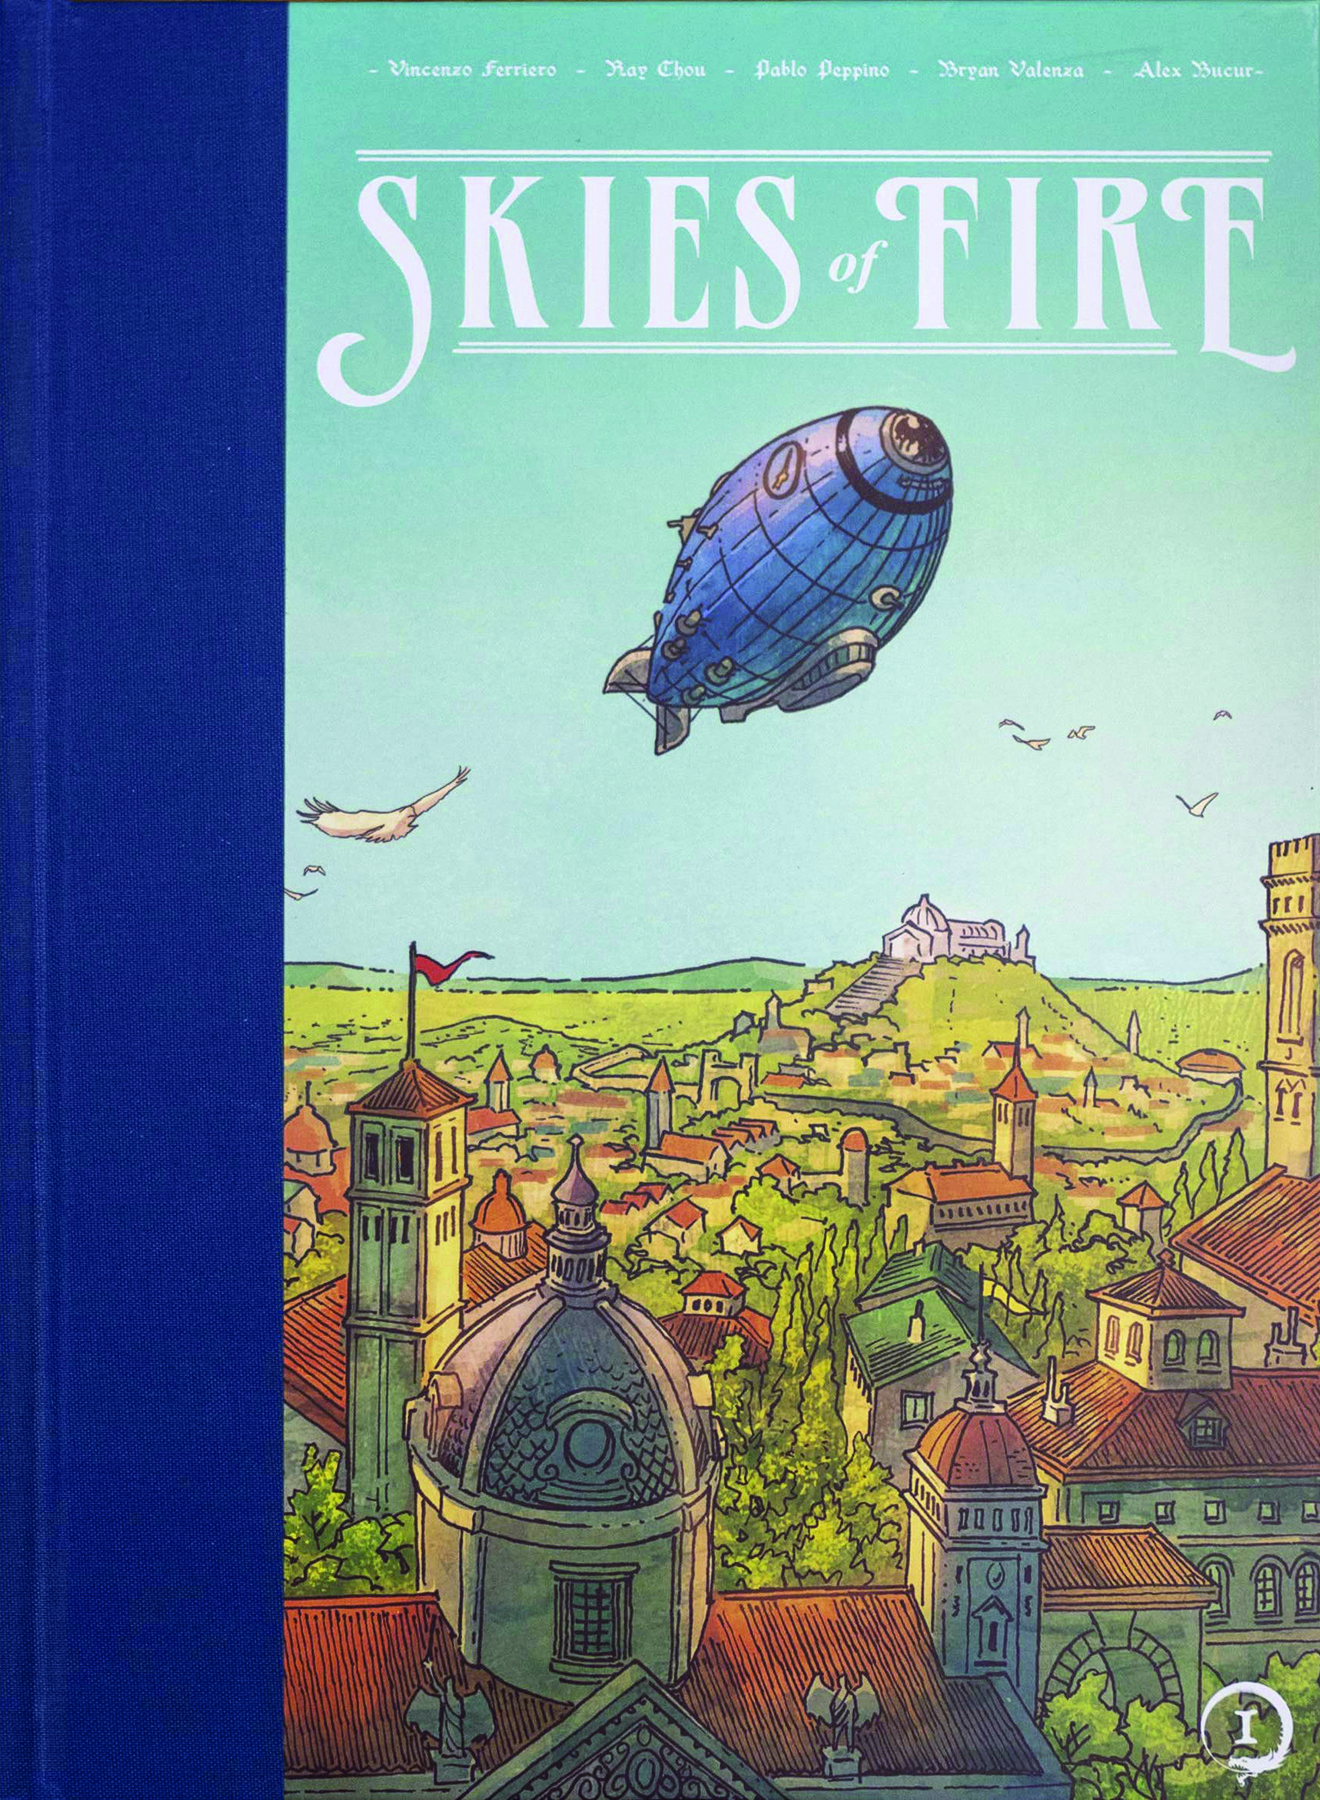 Skies of Fire Hardcover